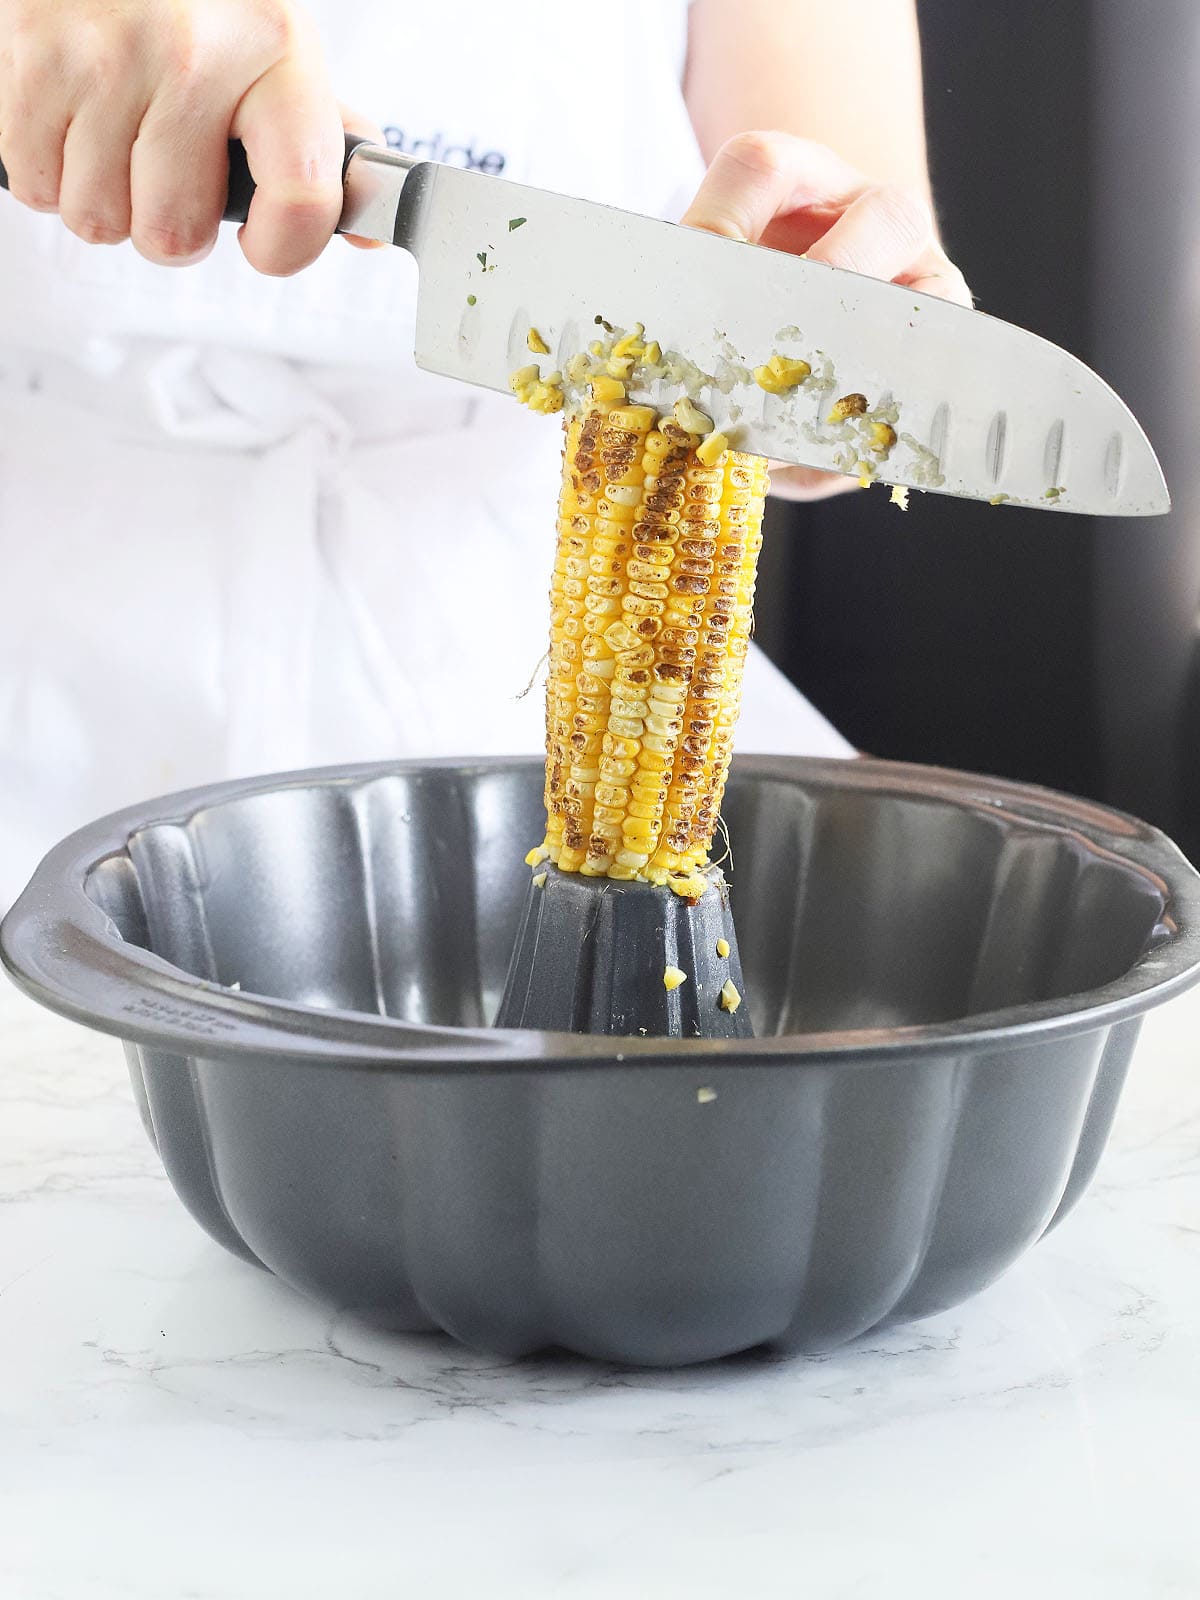 using a bundt cake pan to remove the kernels from the corn